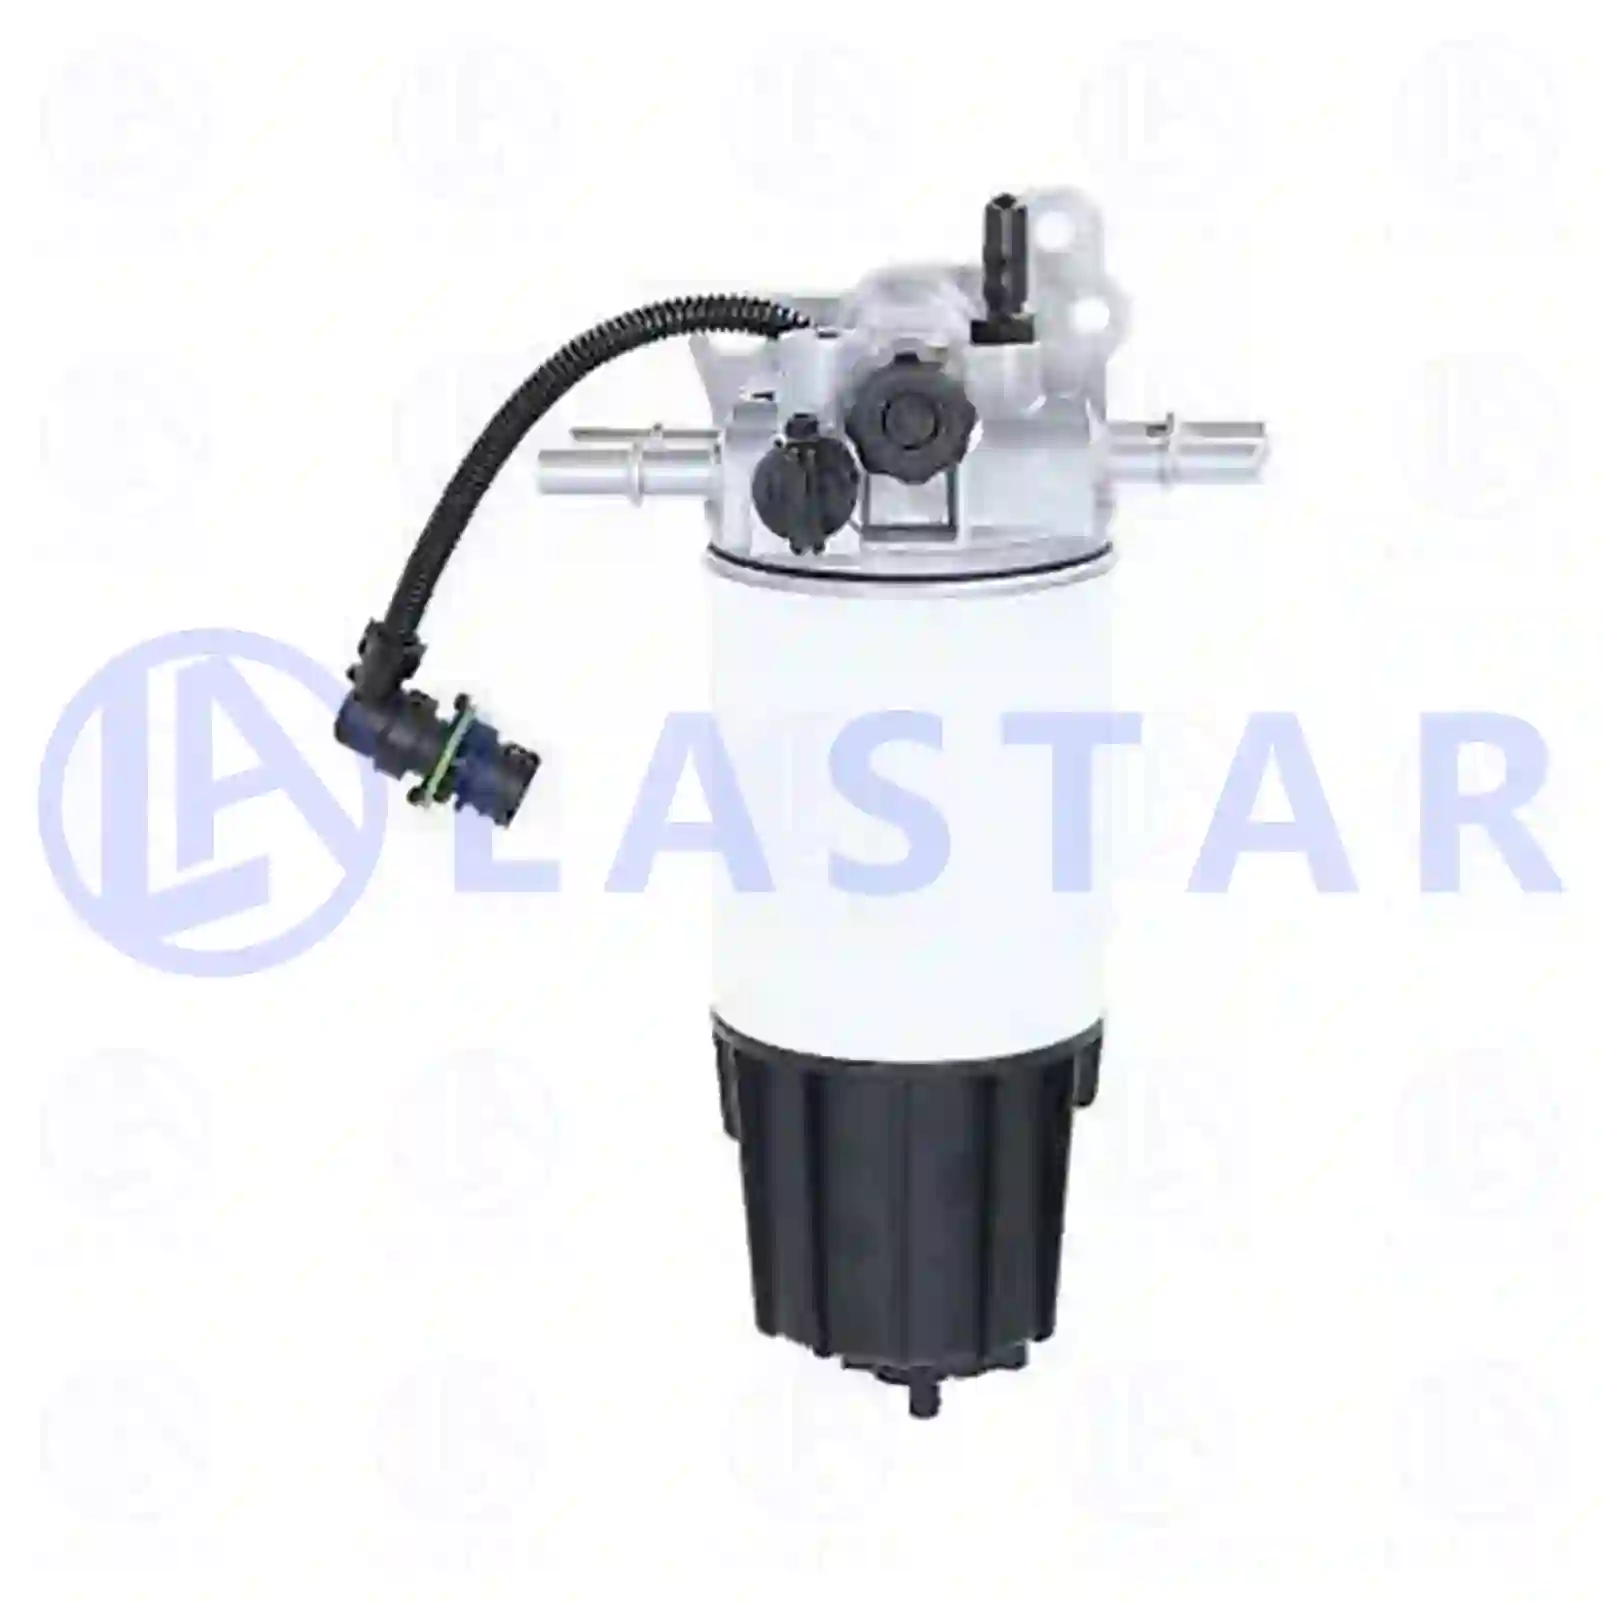 Fuel filter, complete, 77724095, 7421088121, 20591266, 21088119, 21088121 ||  77724095 Lastar Spare Part | Truck Spare Parts, Auotomotive Spare Parts Fuel filter, complete, 77724095, 7421088121, 20591266, 21088119, 21088121 ||  77724095 Lastar Spare Part | Truck Spare Parts, Auotomotive Spare Parts